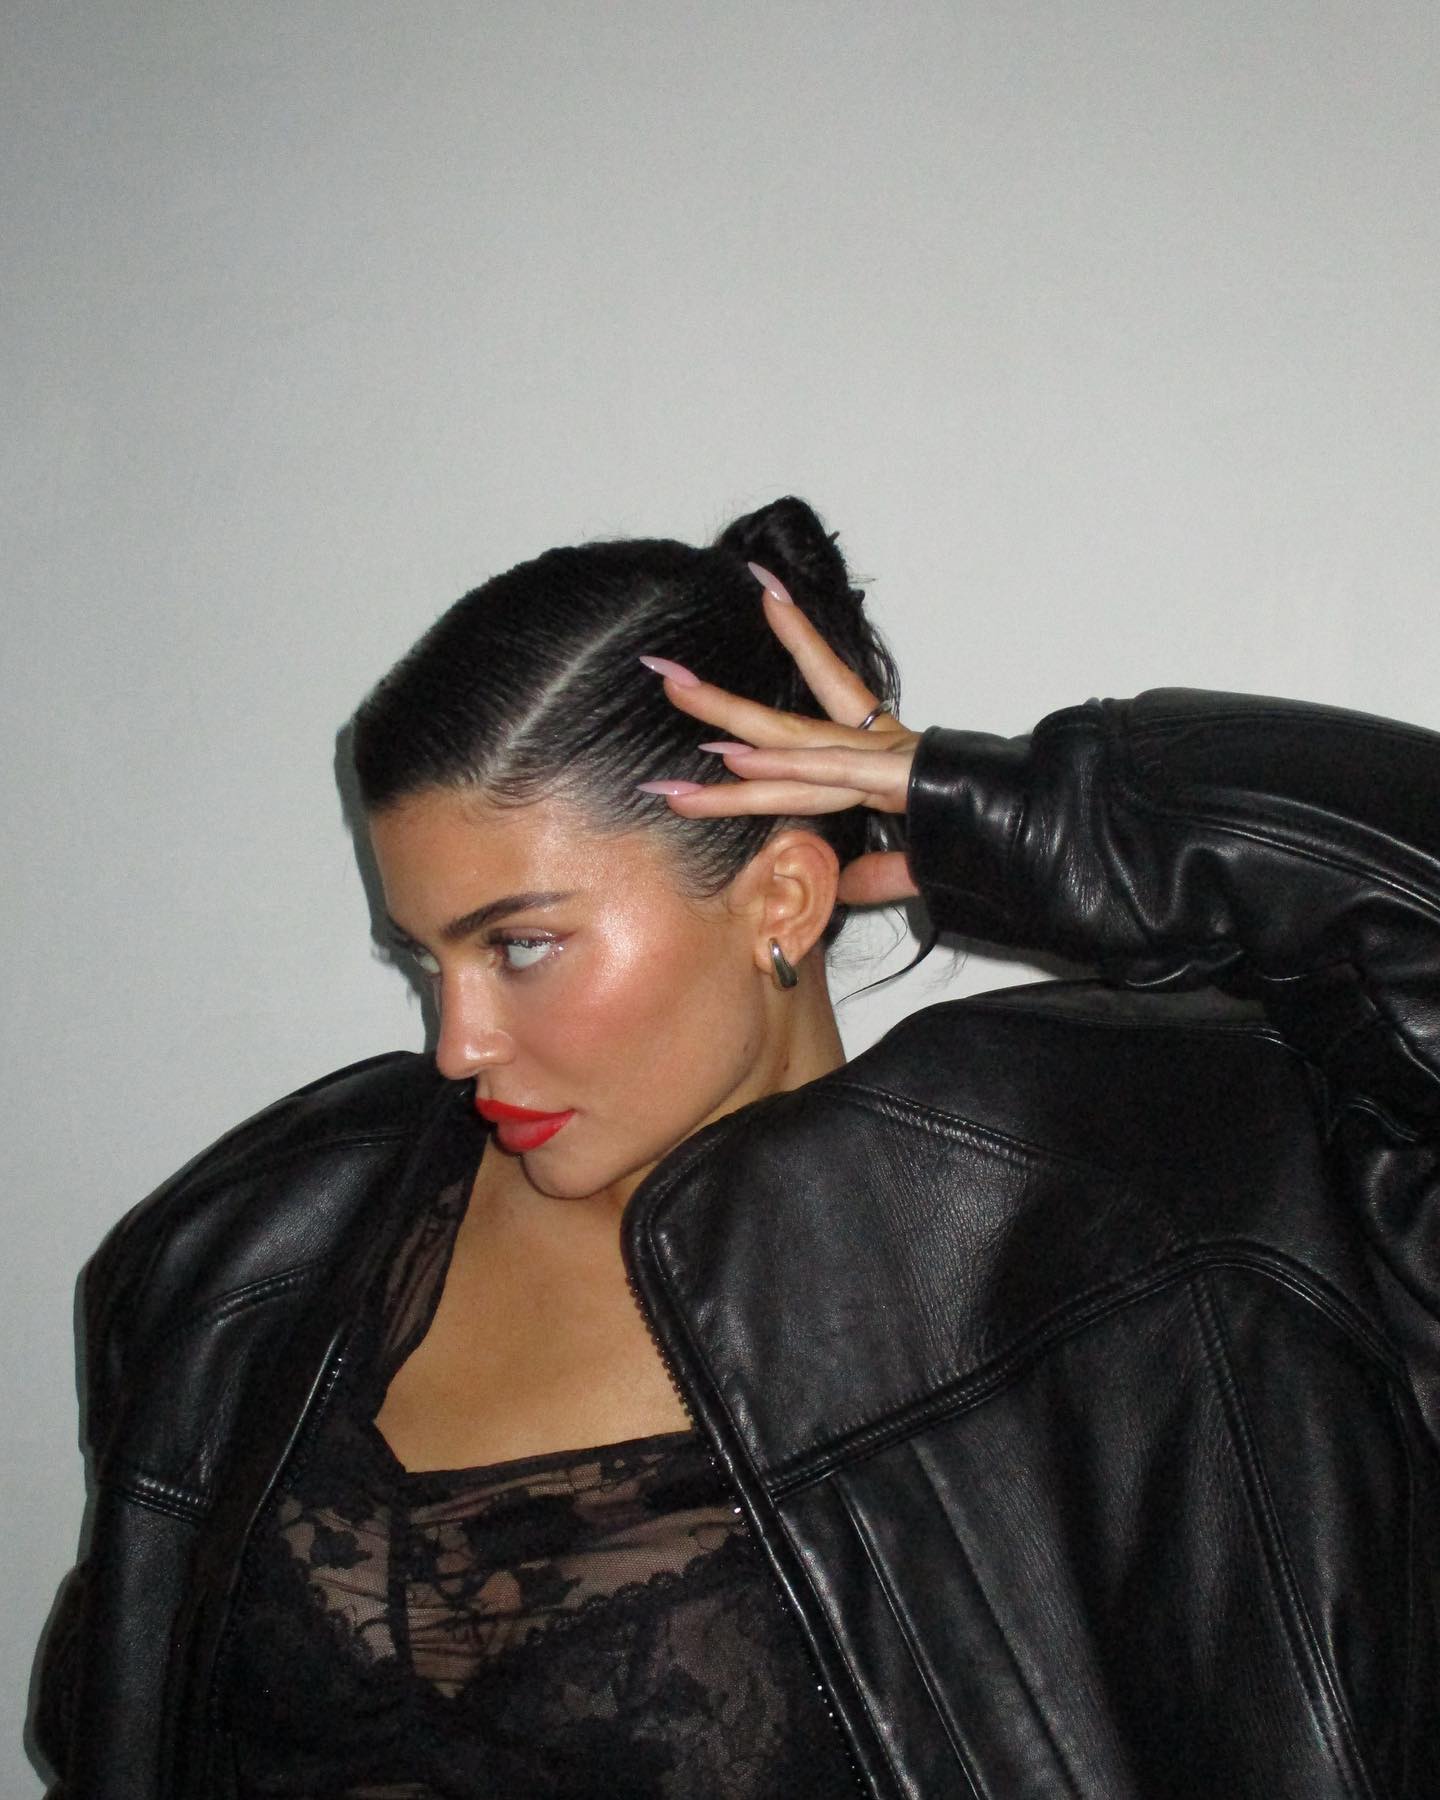 Kylie Jenner Gives Her Sister Kim Some Attitude! - Photo 9